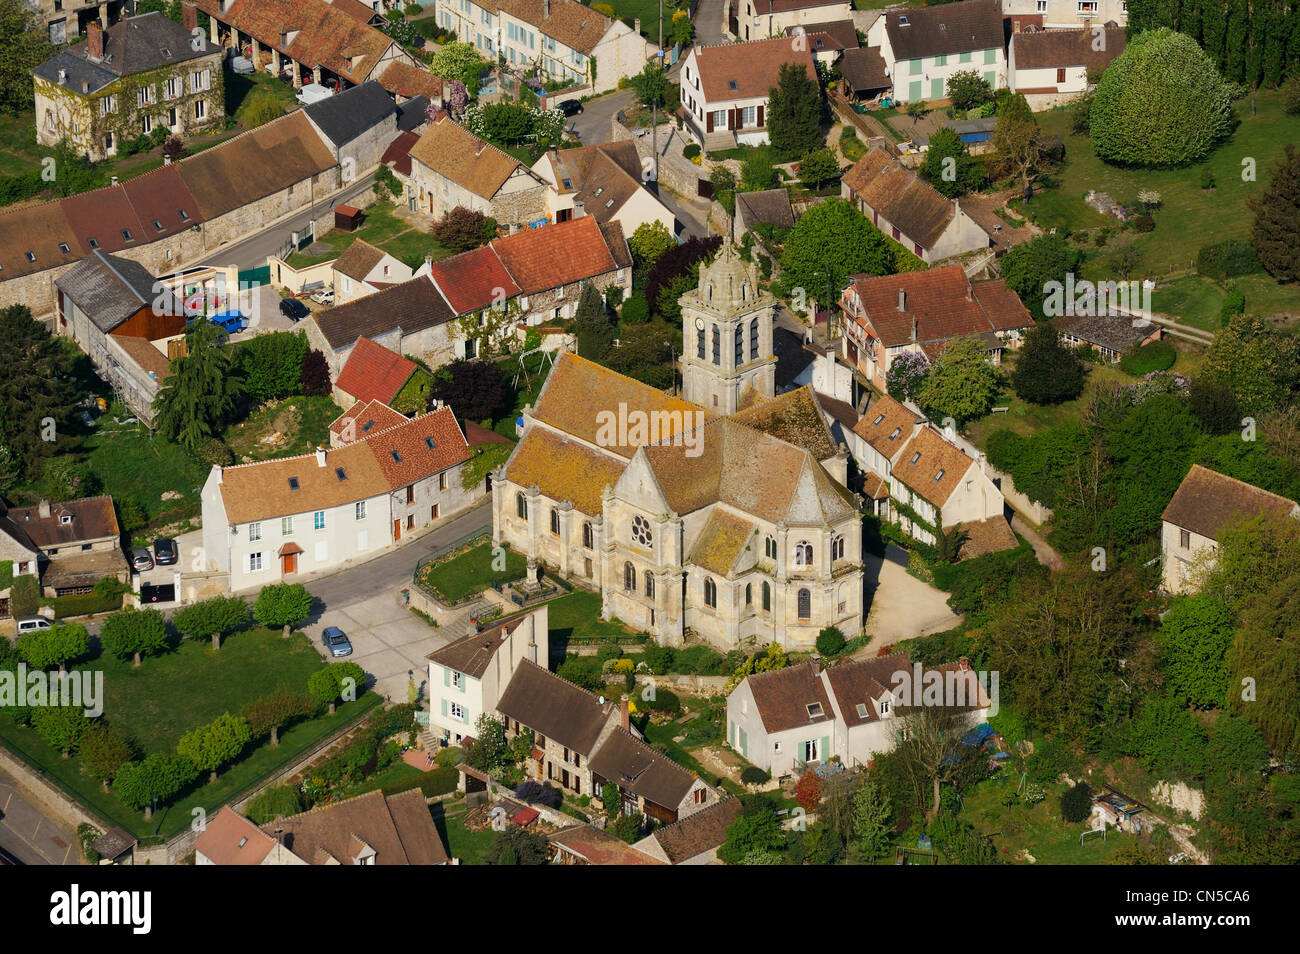 France, Val d'Oise, Epiais Rhus, the church Notre Dame de l'Assomption from the 16th century in the village (aerial view) Stock Photo